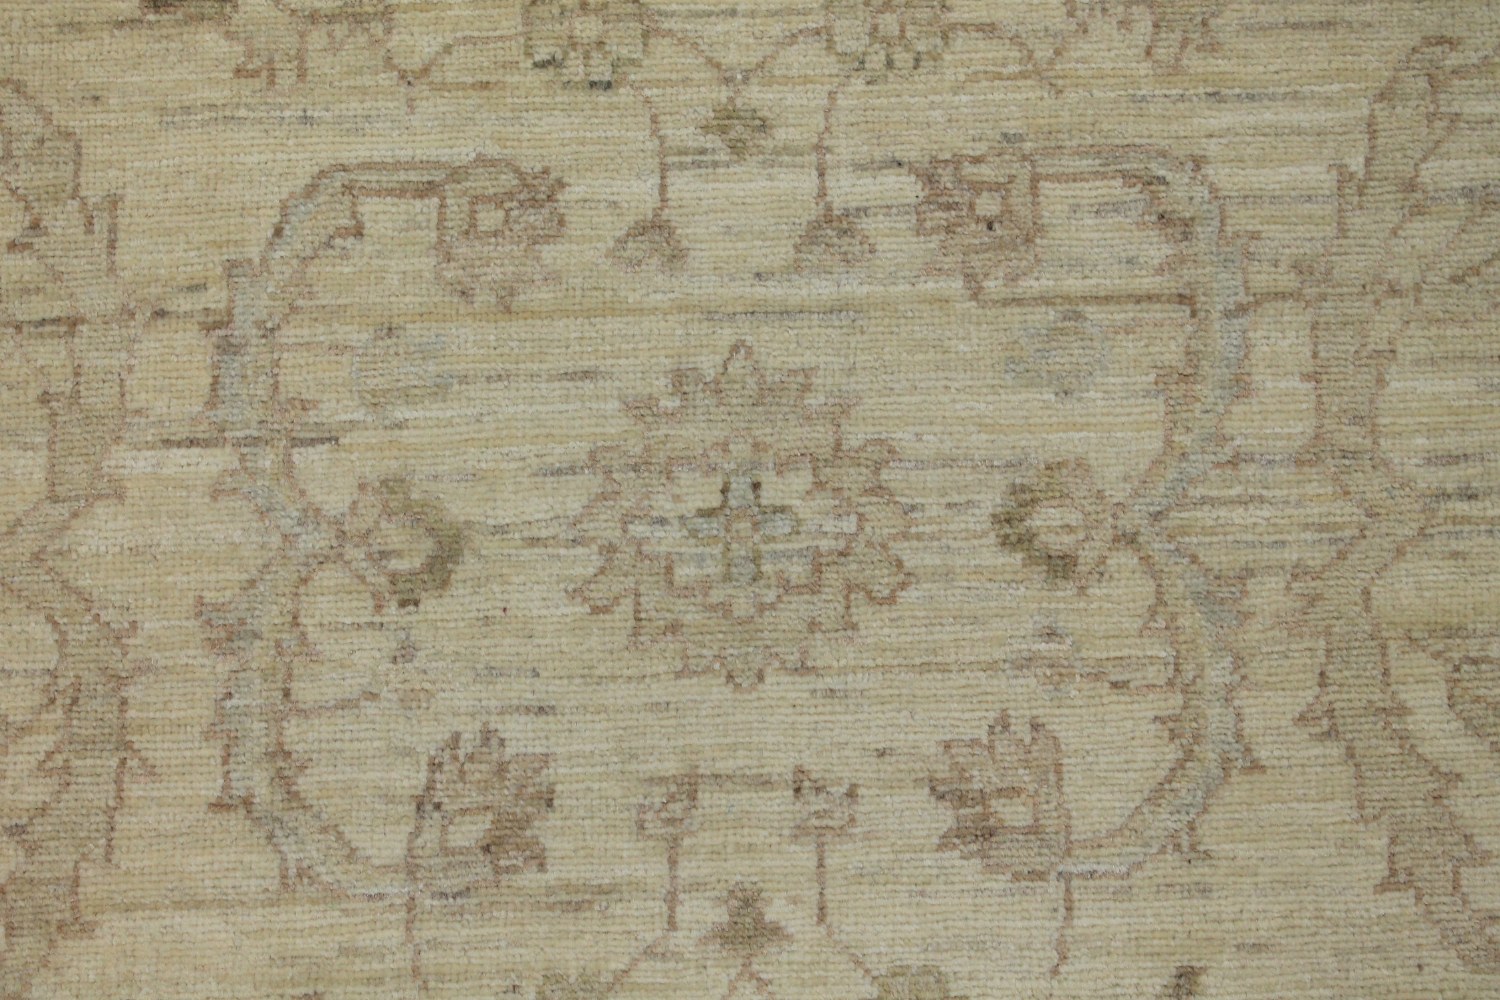 4x6 Peshawar Hand Knotted Wool Area Rug - MR14133